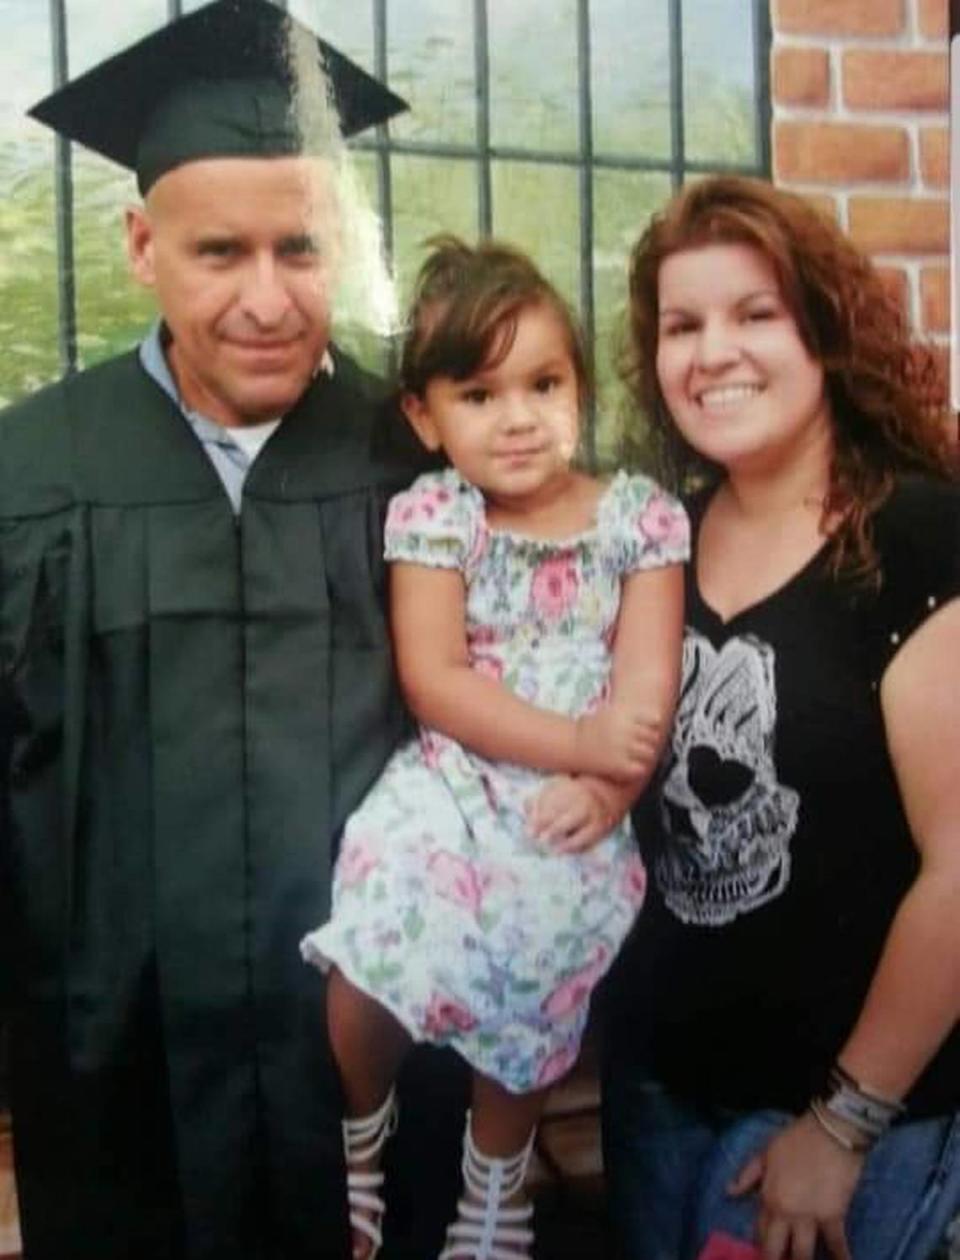 Henry Camacho with his daughter, Chrystal, and grandchild.